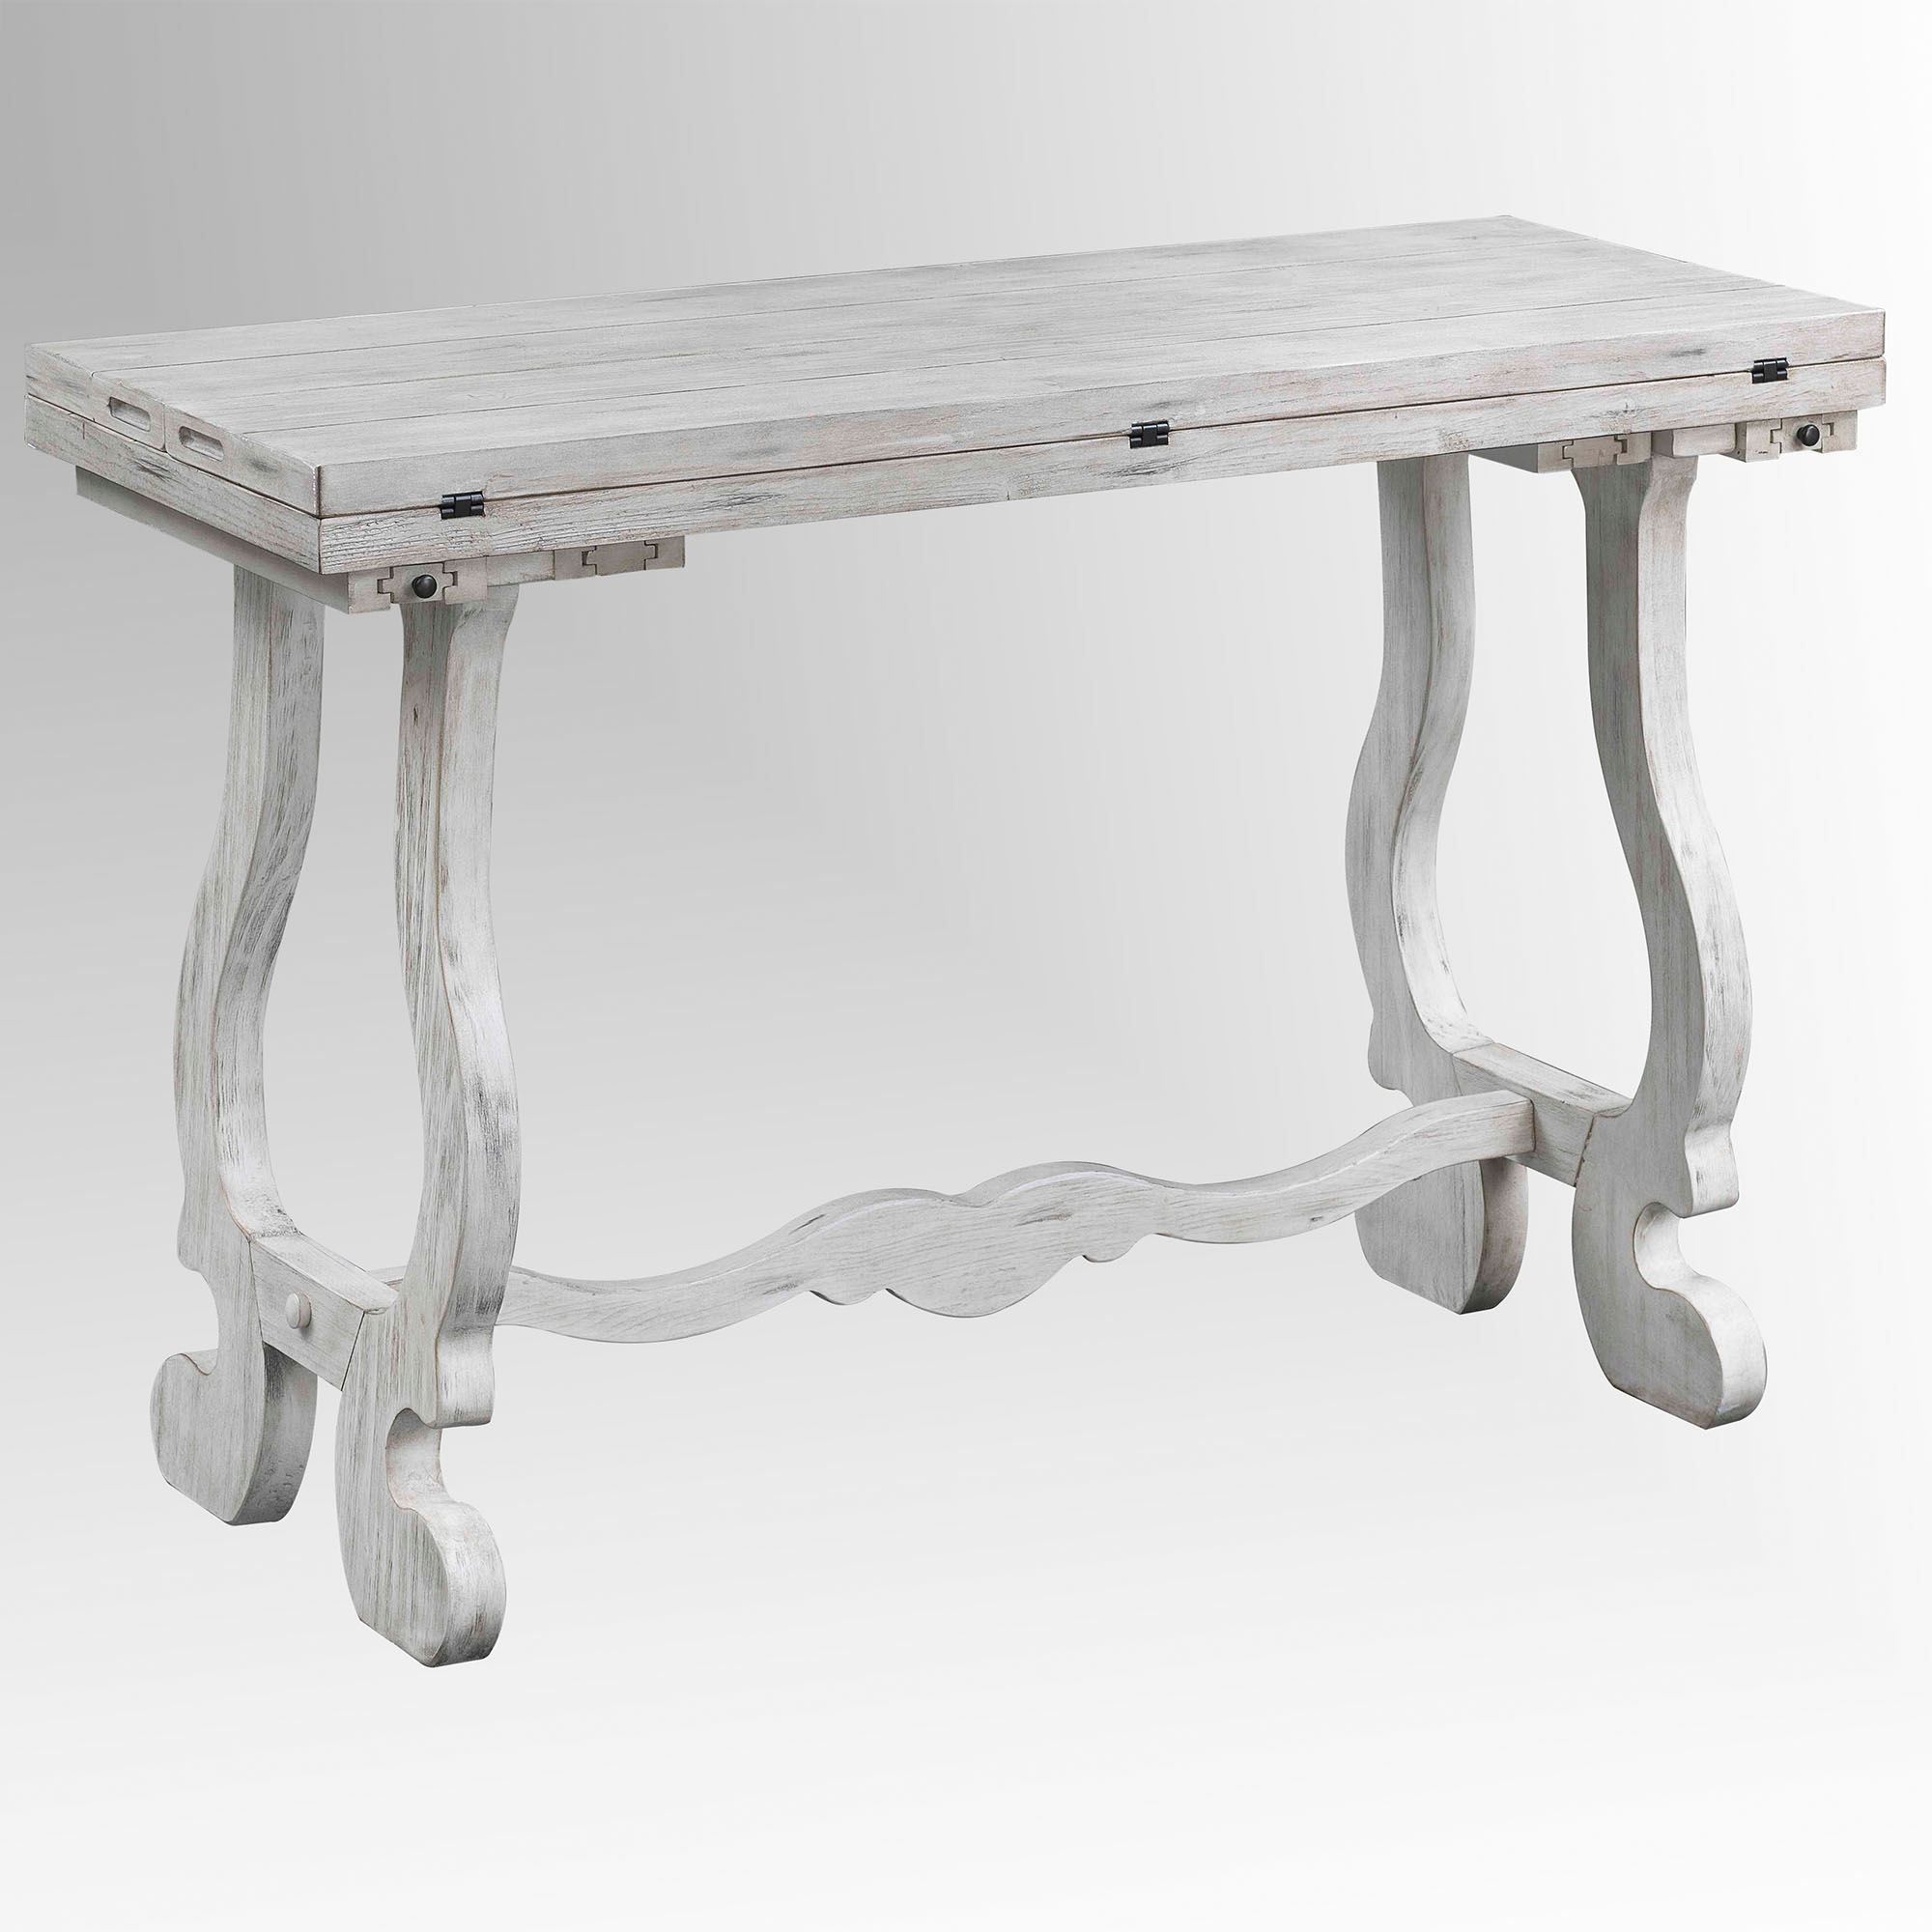 Most Recent Rubbed White Console Tables Throughout Alexis Weathered White Fold Out Wooden Console Table (View 13 of 15)